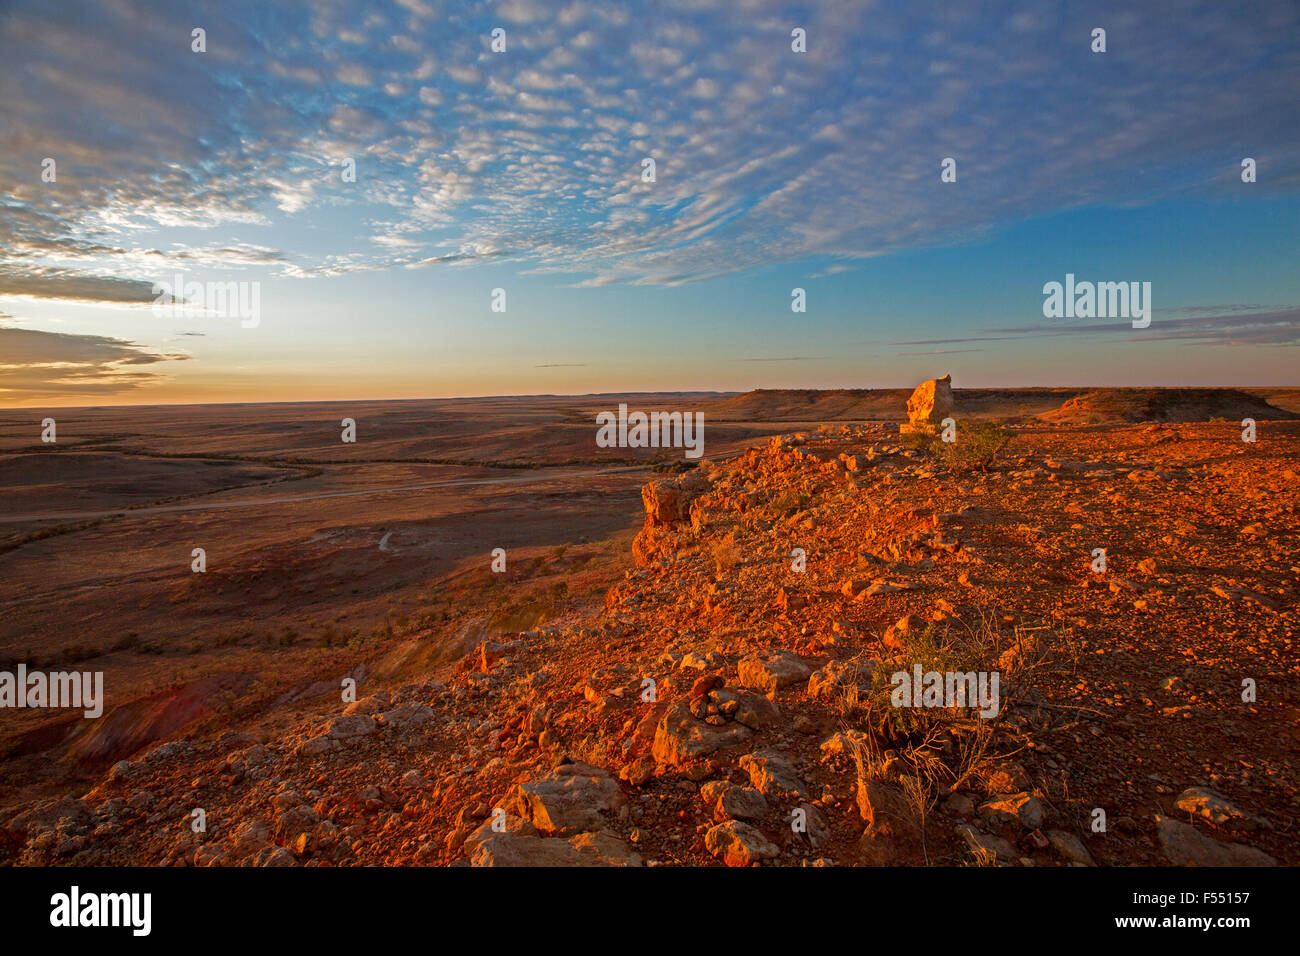 Stunning Australian outback landscape from hilltop lookout at sunset, rocky mesas on vast barren treeless plains stretching to far horizon Stock Photo